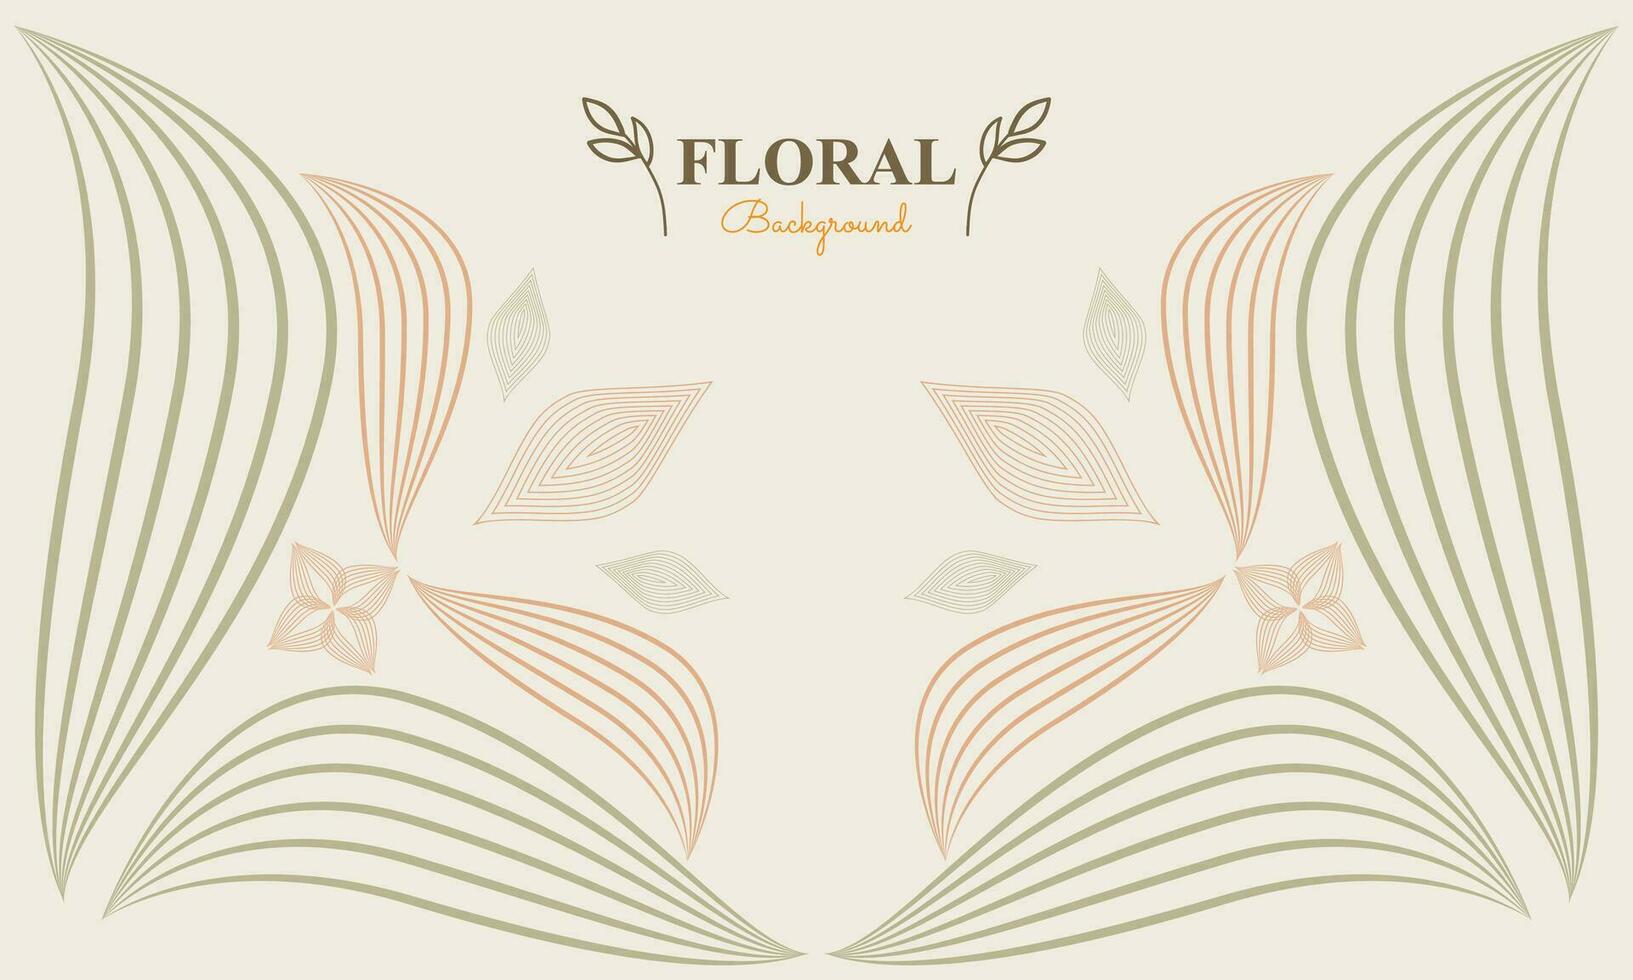 natural background with abstract natural shape, leaf and floral ornament in soft color style design vector